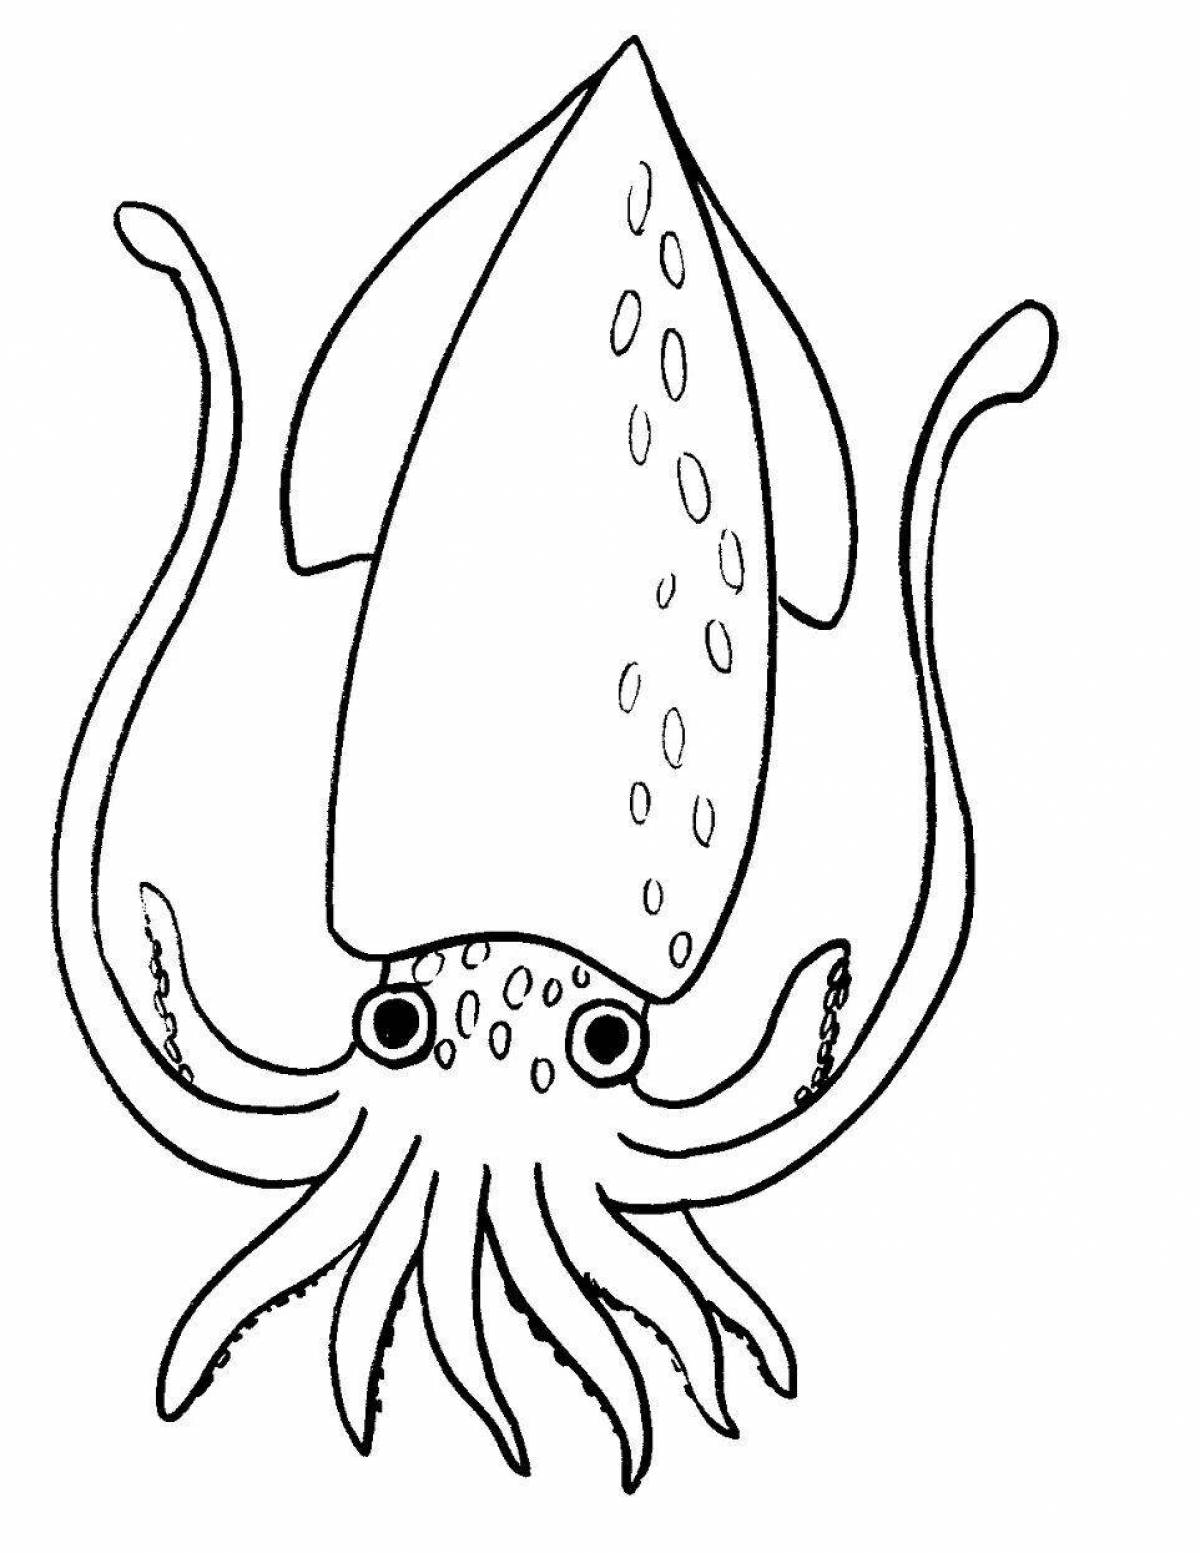 Playful squid coloring for kids